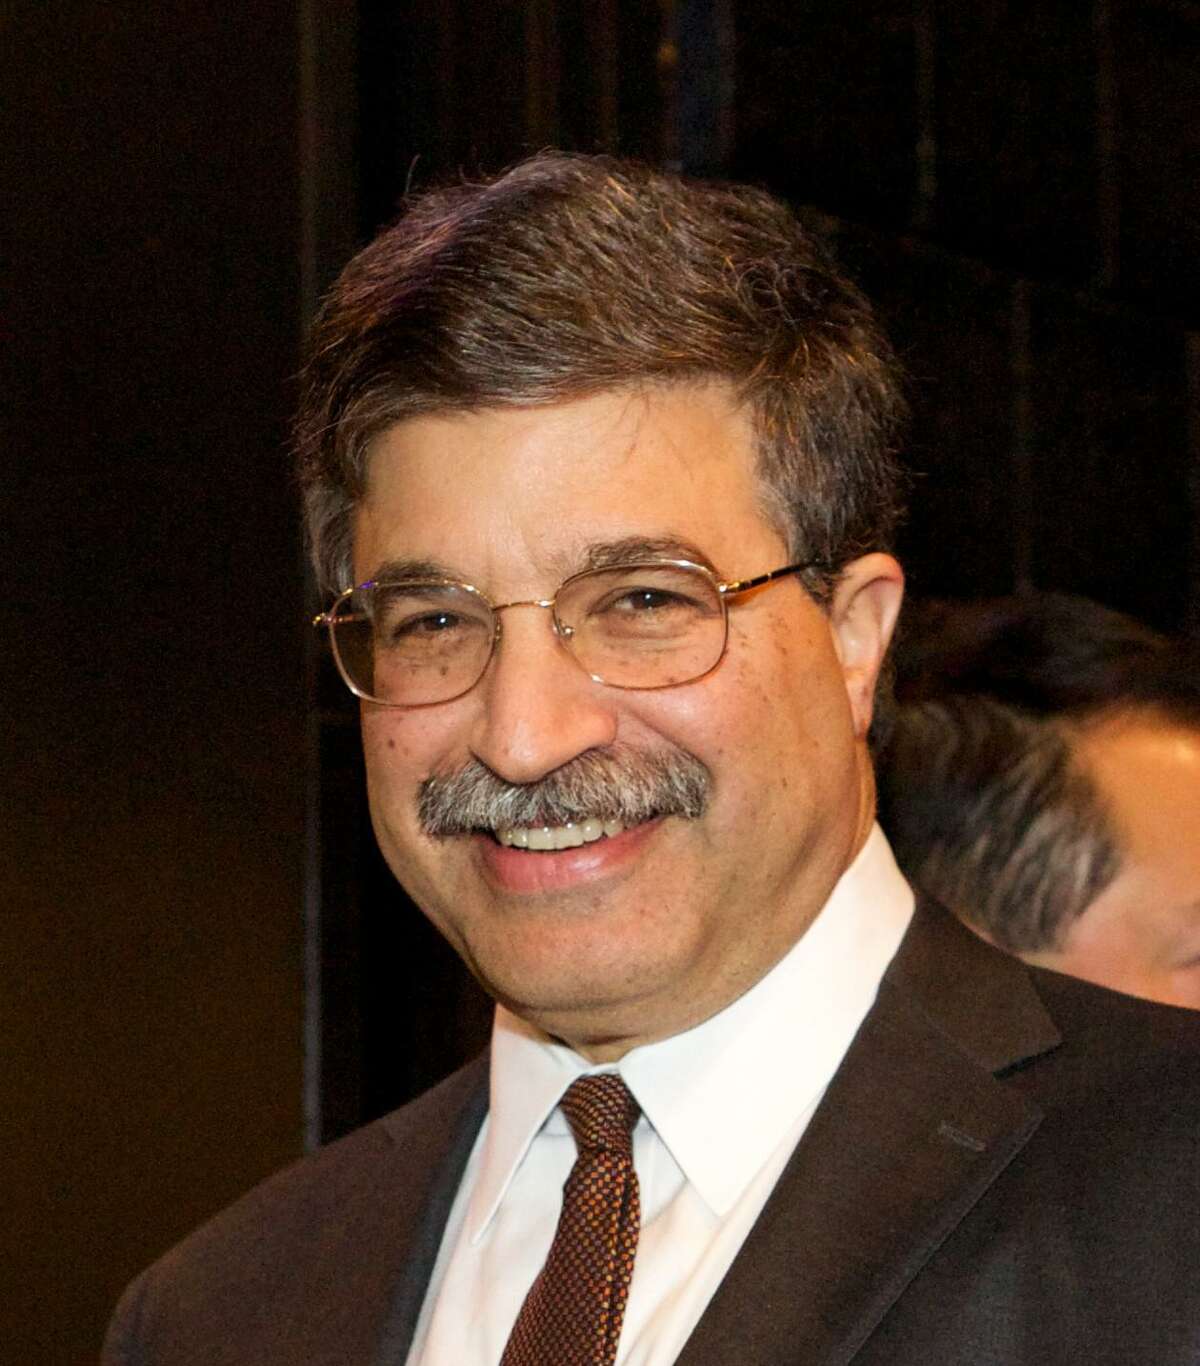 William W. Ginsberg has served as President and Chief Executive Officer of The Community Foundation for Greater New Haven since 2000.